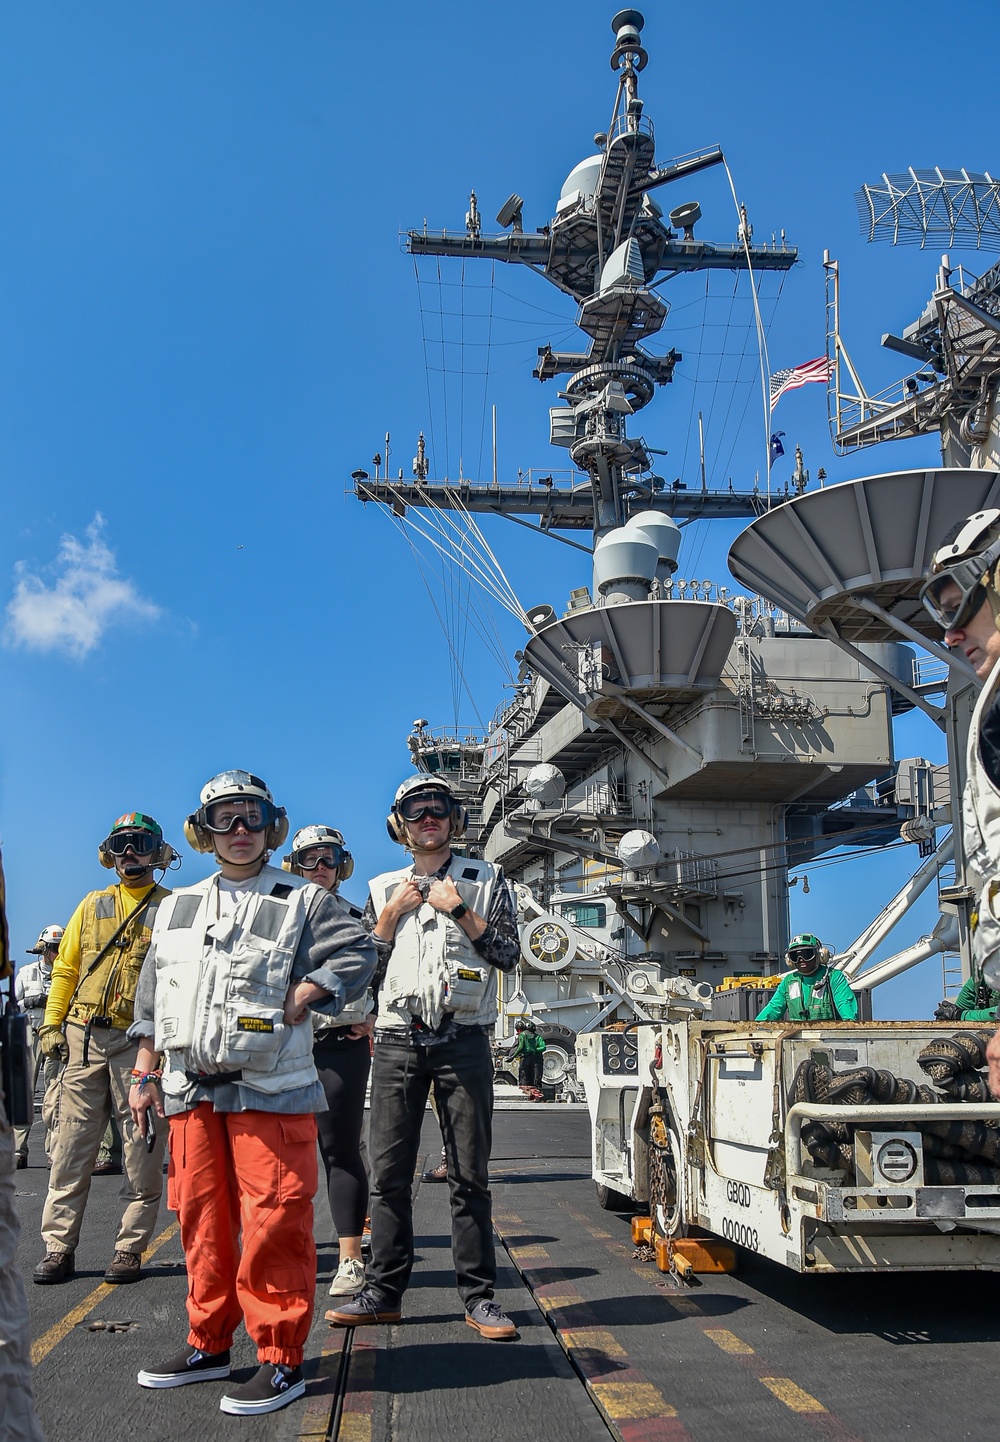 The Harry S. Truman Carrier Strike Group is on a scheduled deployment in the U.S. Naval Forces Europe area of operations, employed by U.S. Sixth Fleet to defend U.S., allied and partner interests.